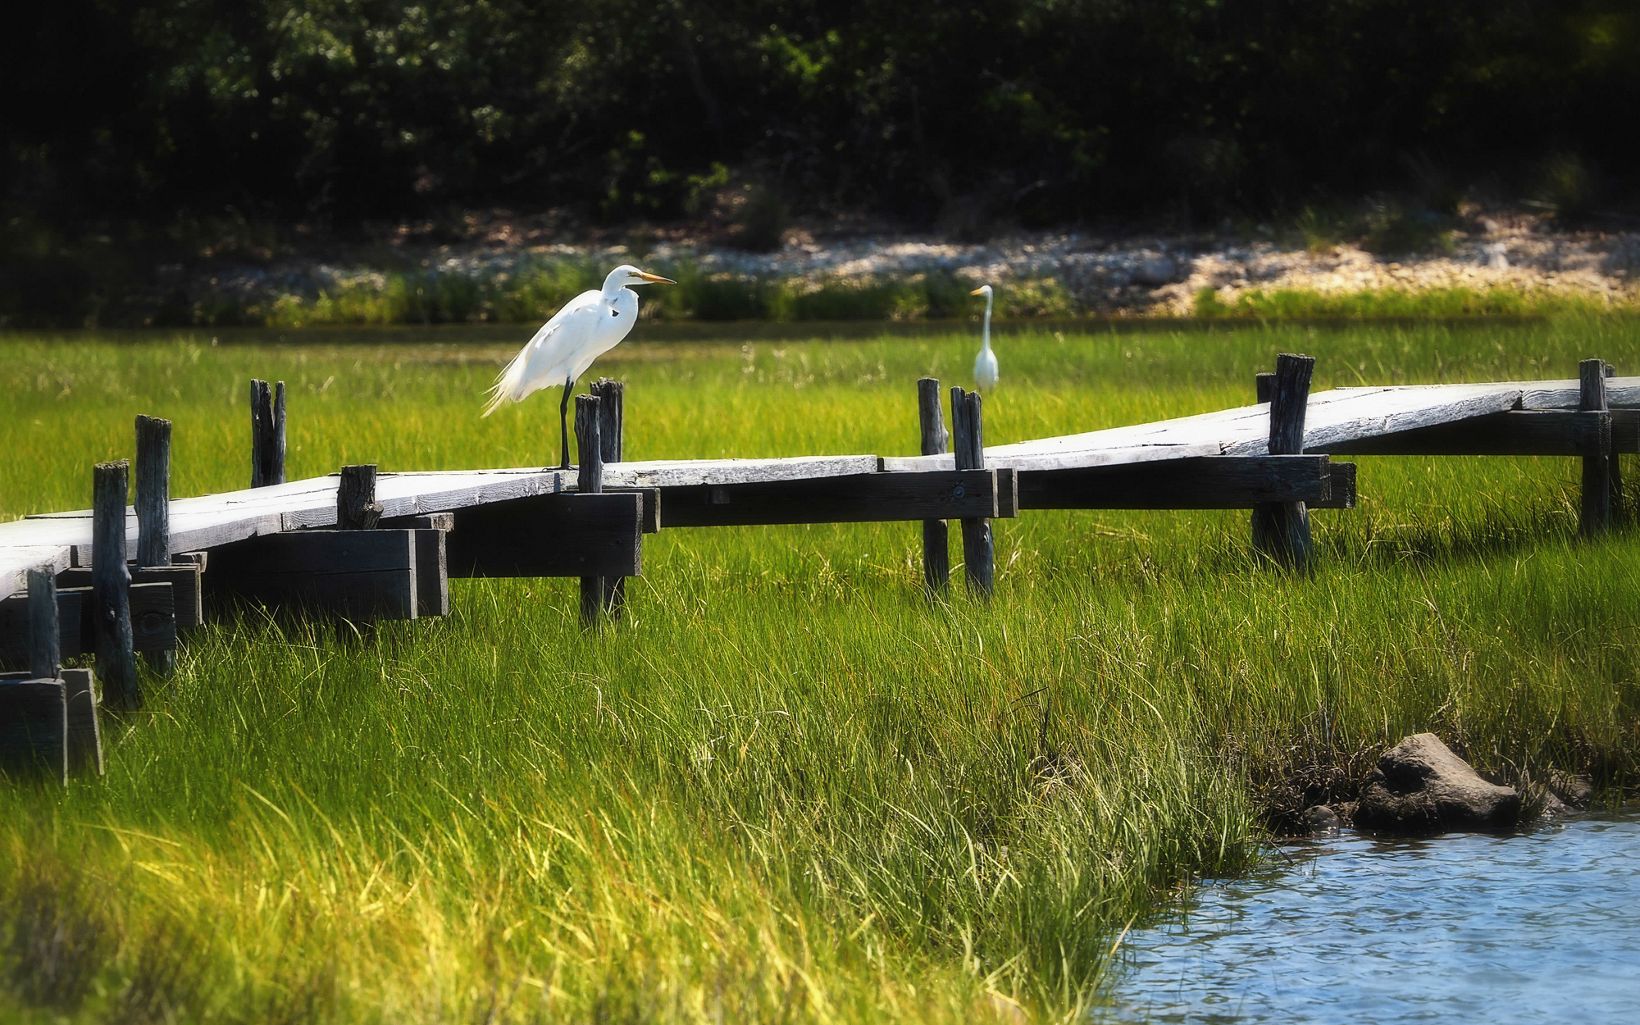 Two large white cranes on a wooden pier over marsh grasses.